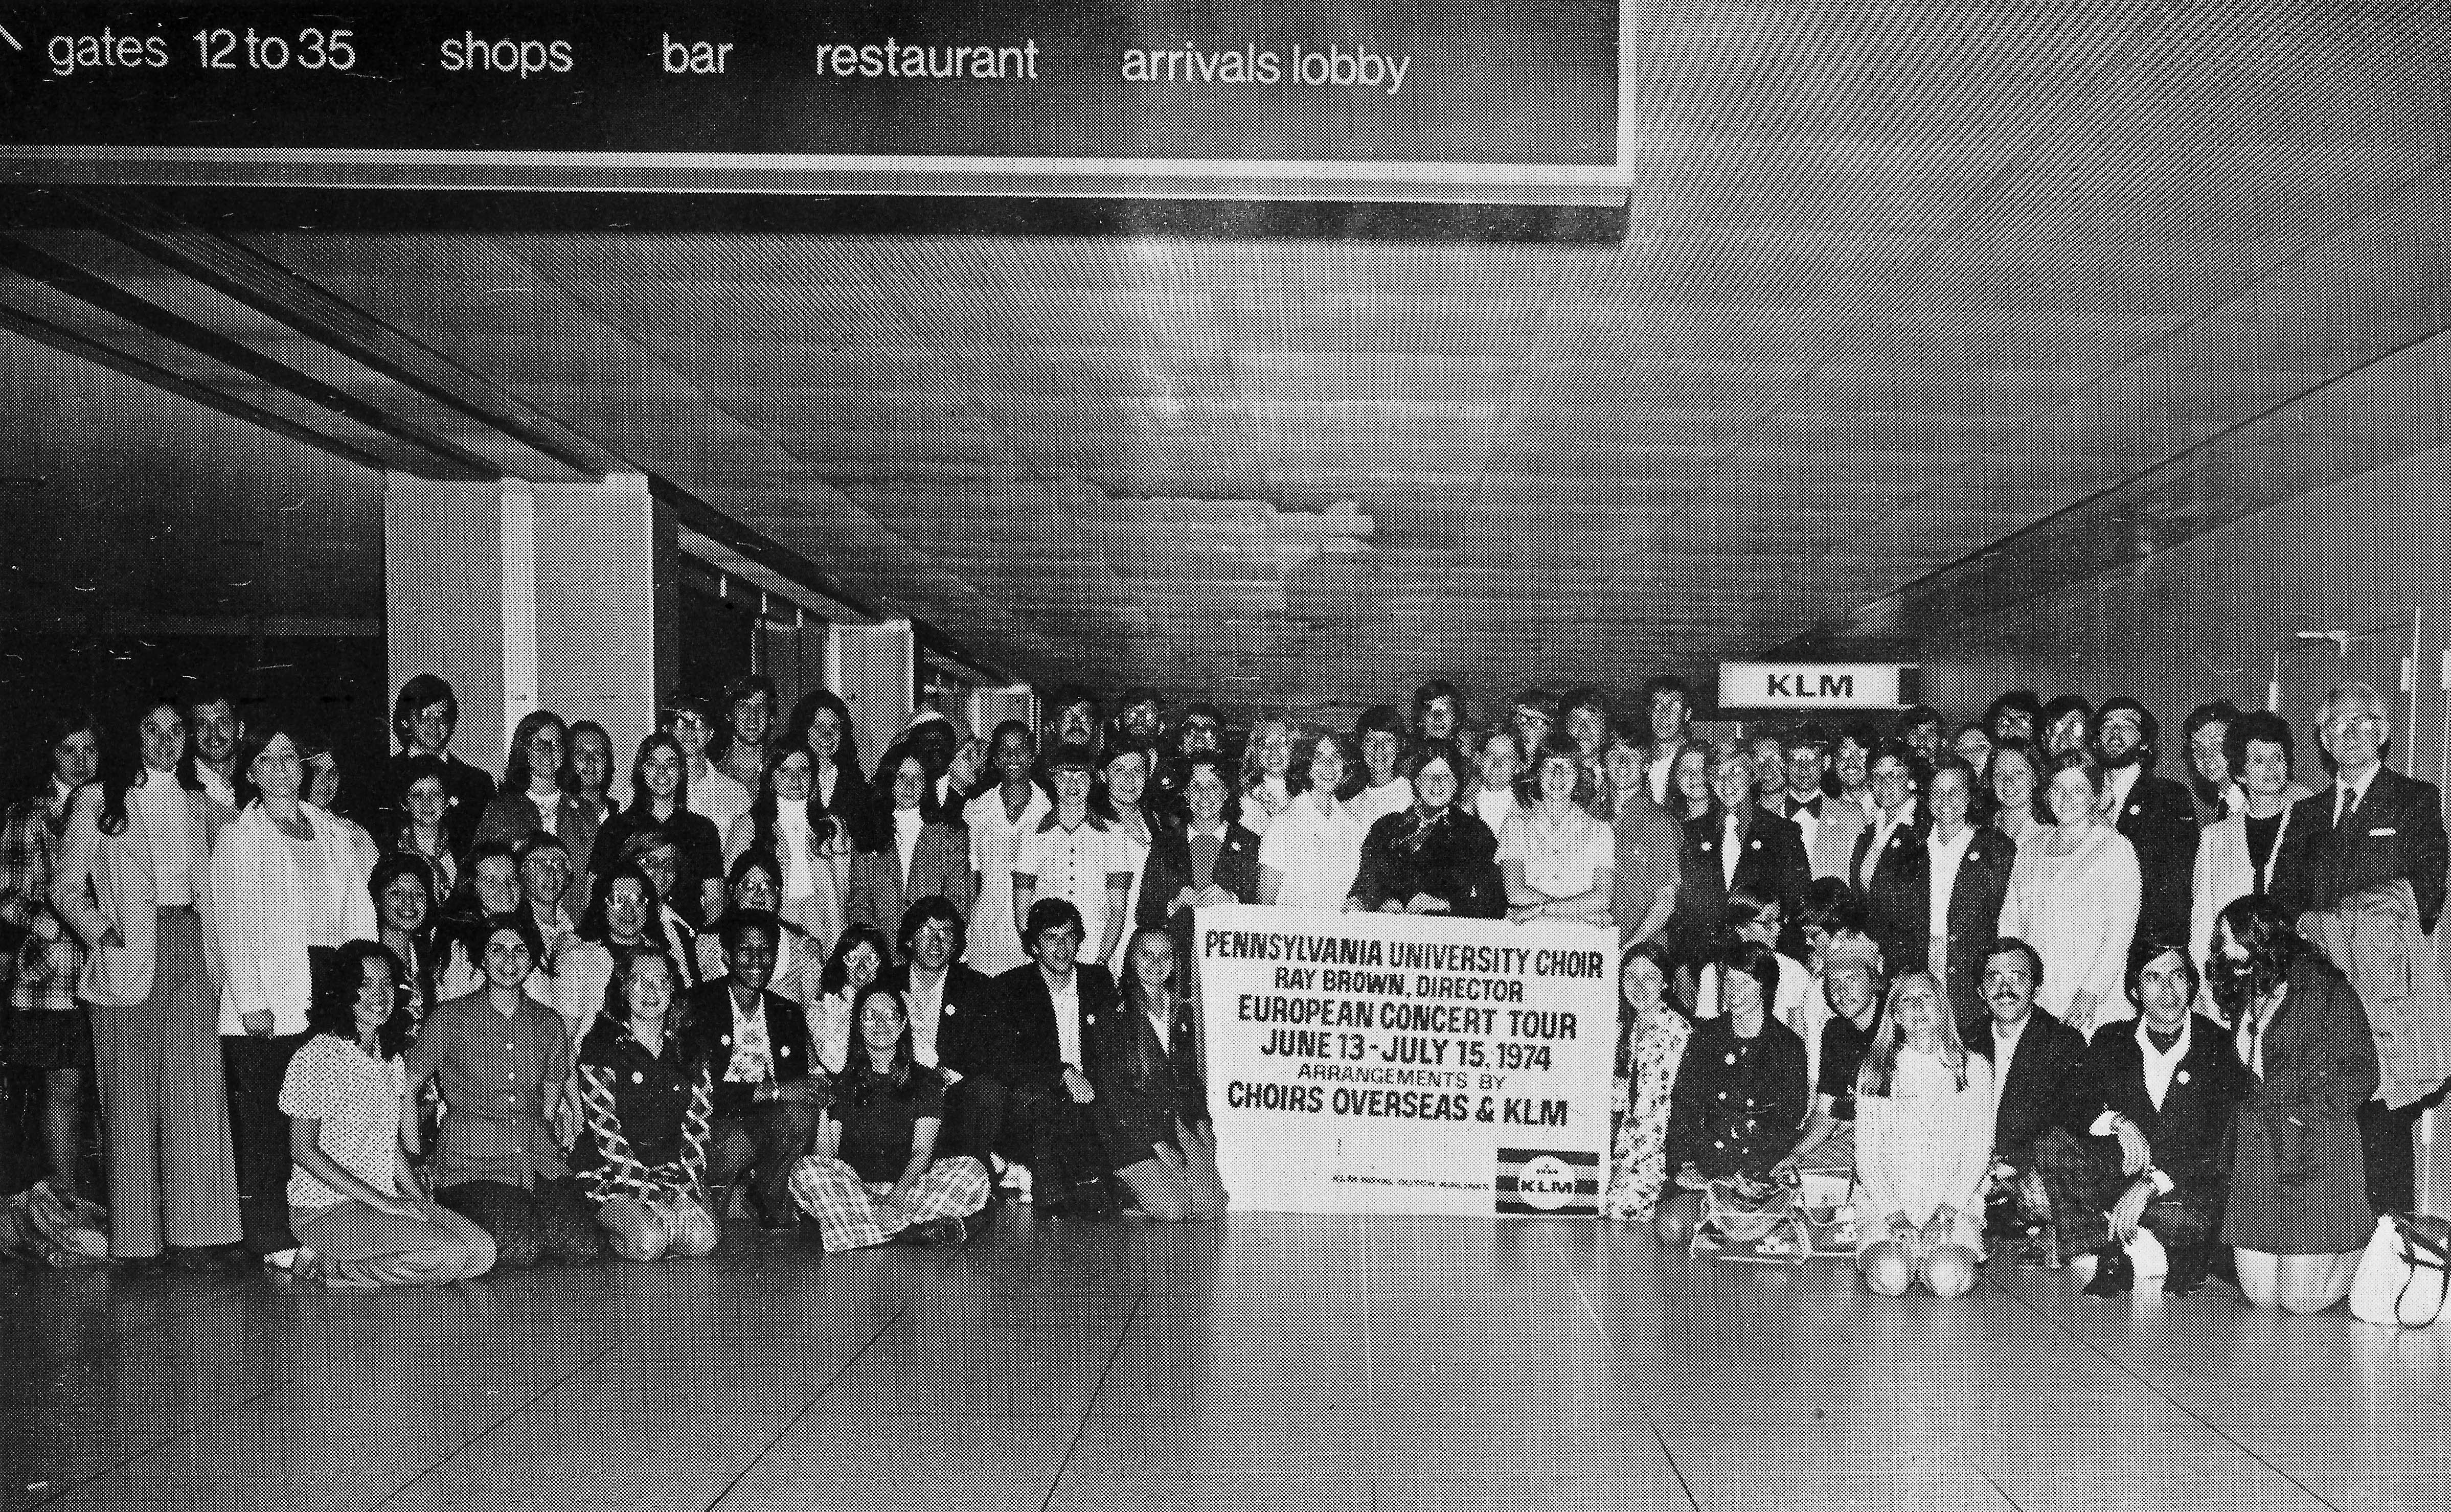 black and white photo of a large group of people at an airport, courtesy